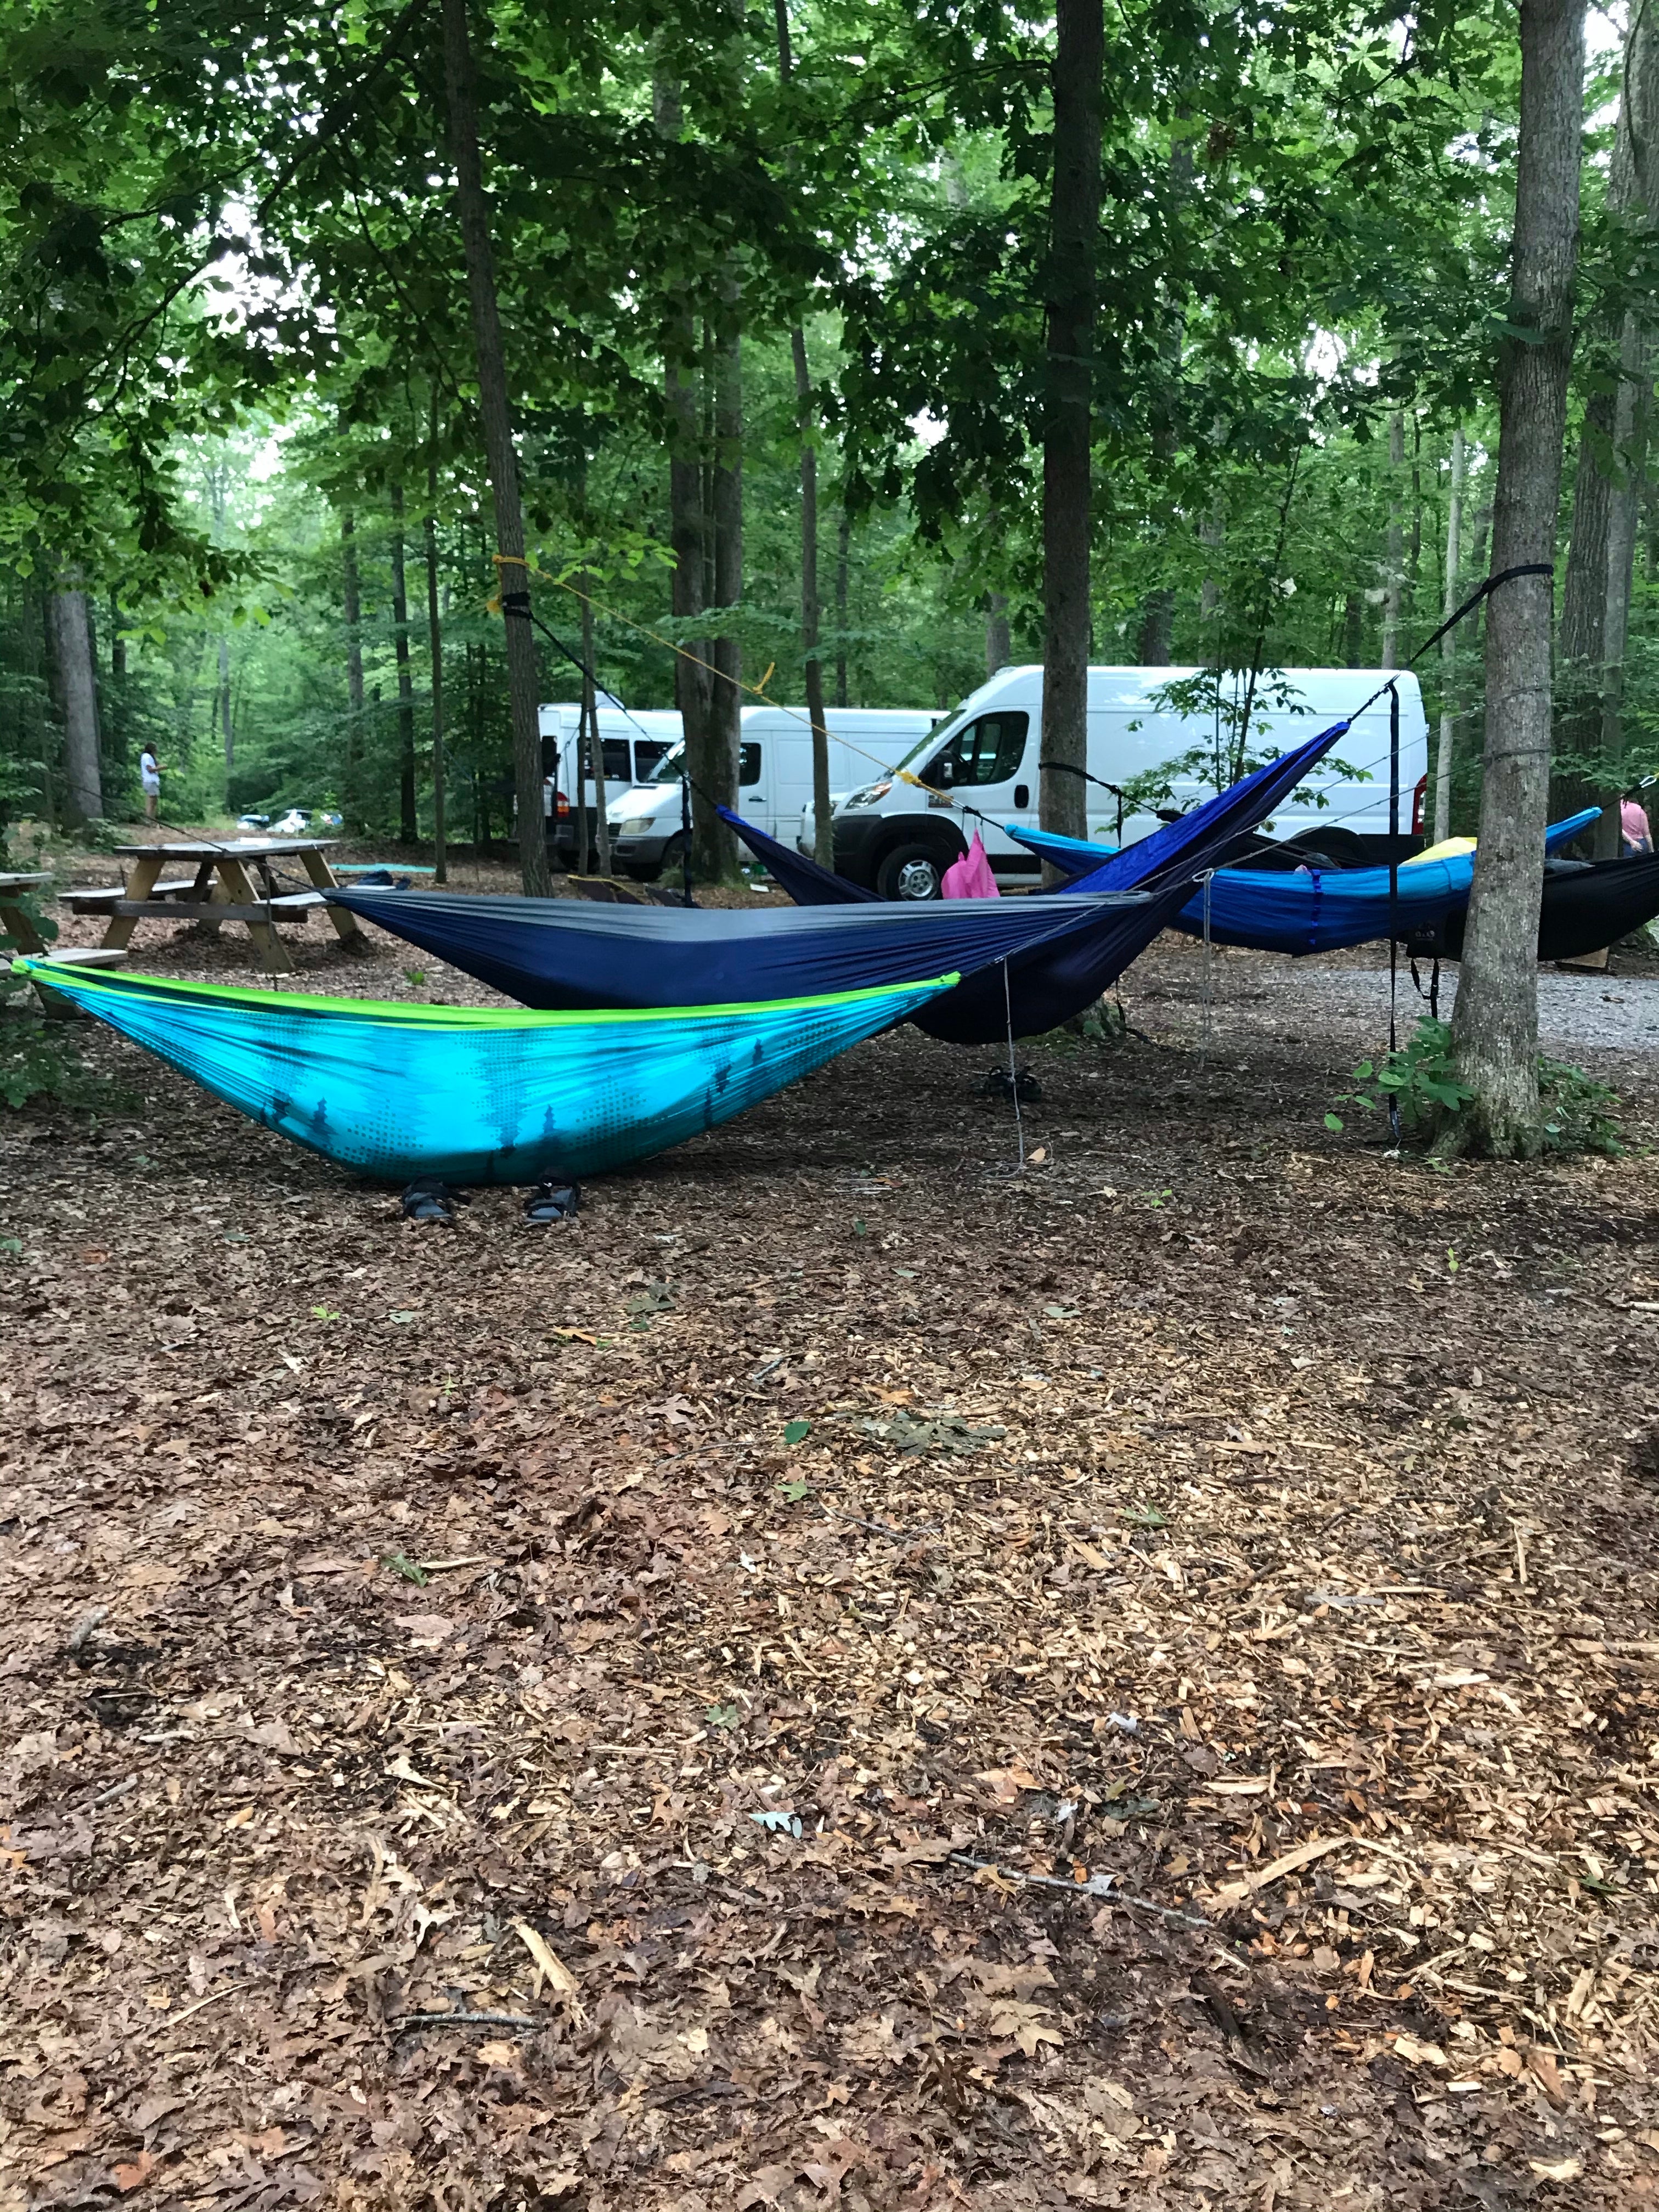 Camper submitted image from New River Gorge Campground - American Alpine Club - 4